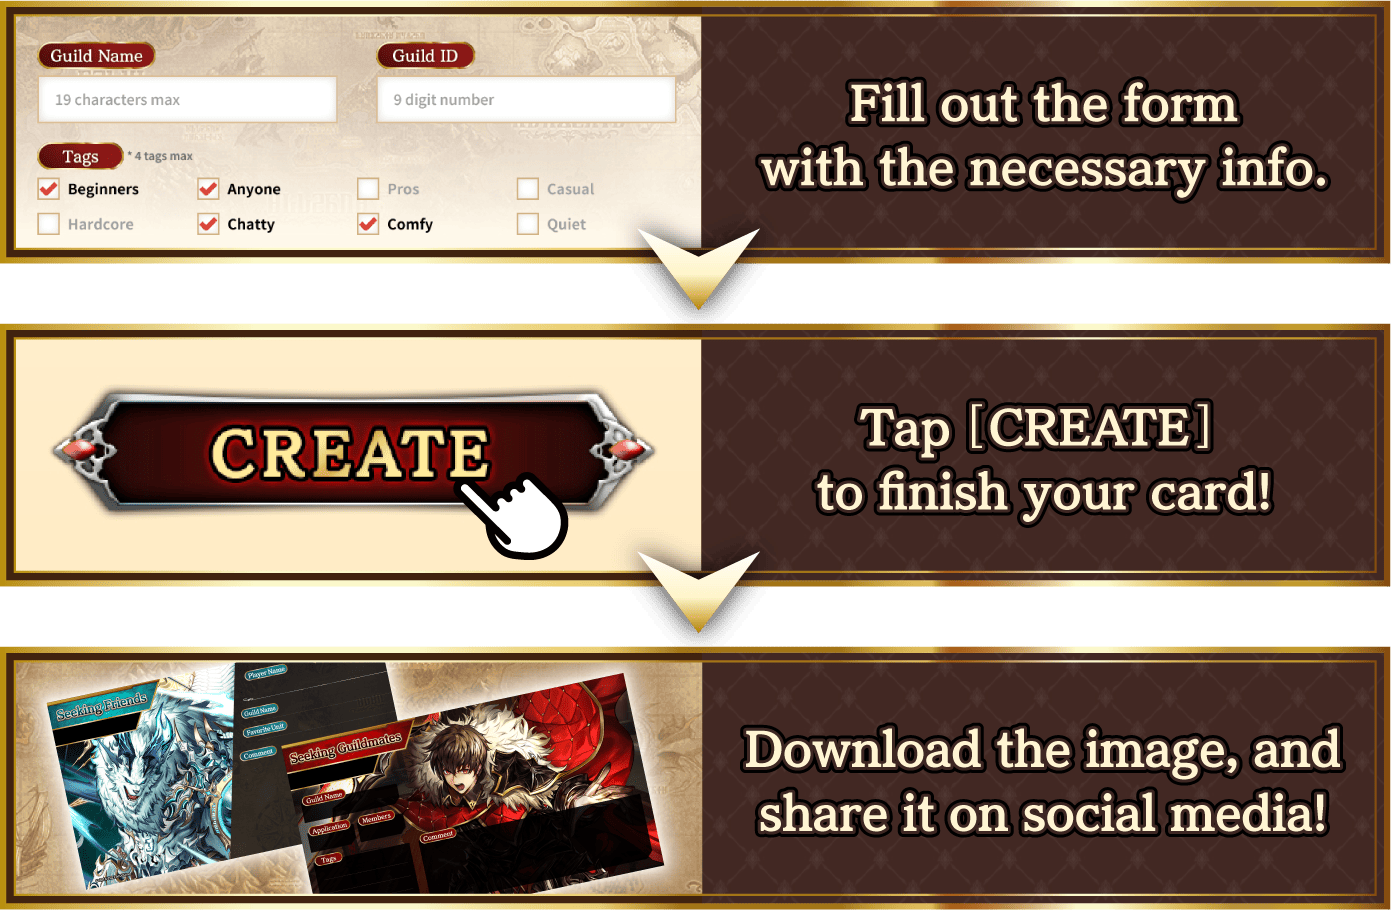 Fill out the form with the necessary info. Tap [CREATE] to finish your card! Download the image,and share it on social media!